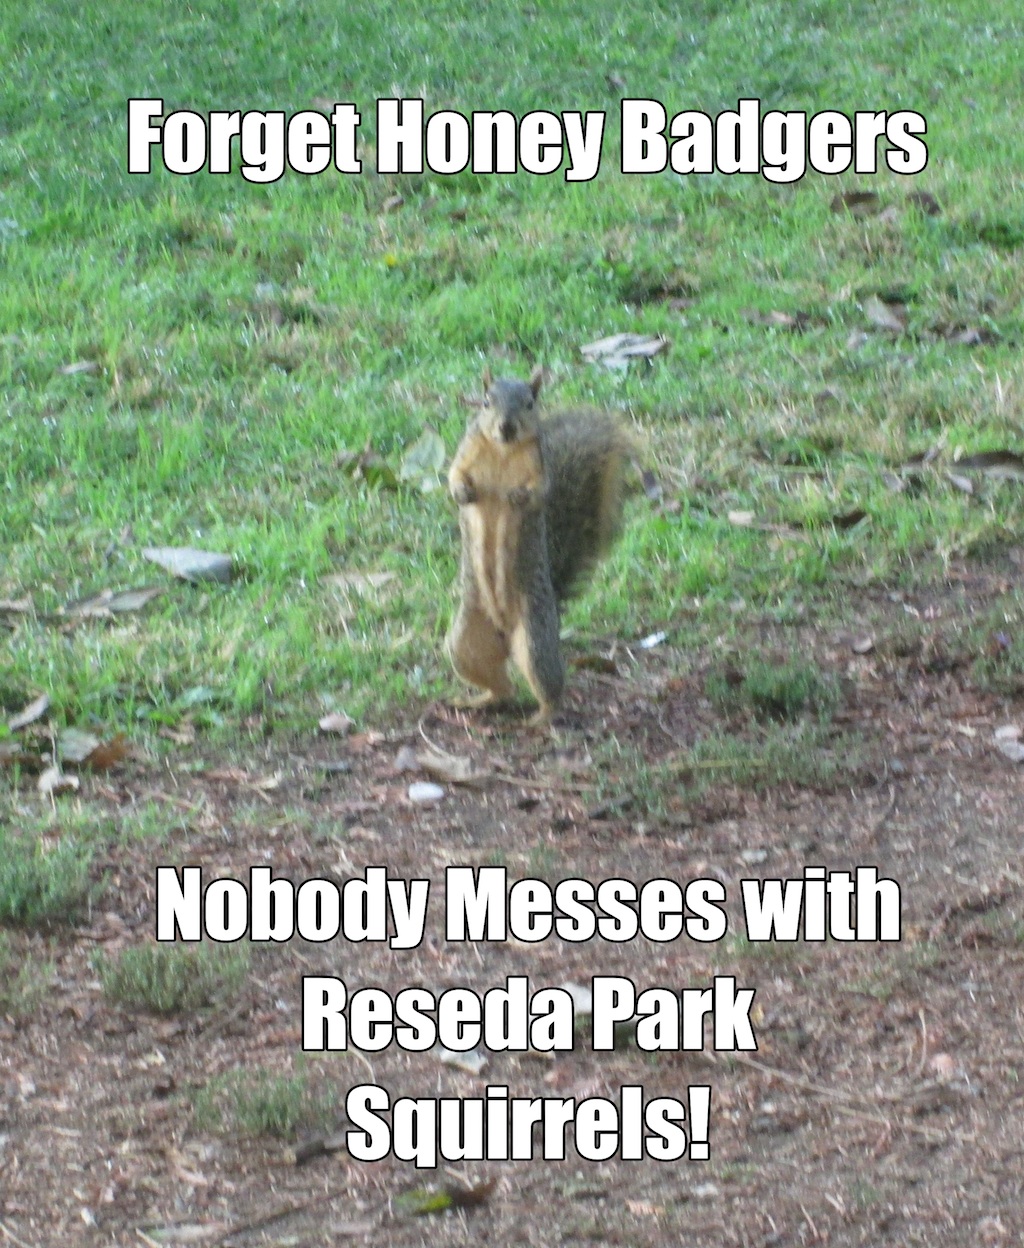 Forget honey badgers, nobody messes with Reseda Park squirrels!